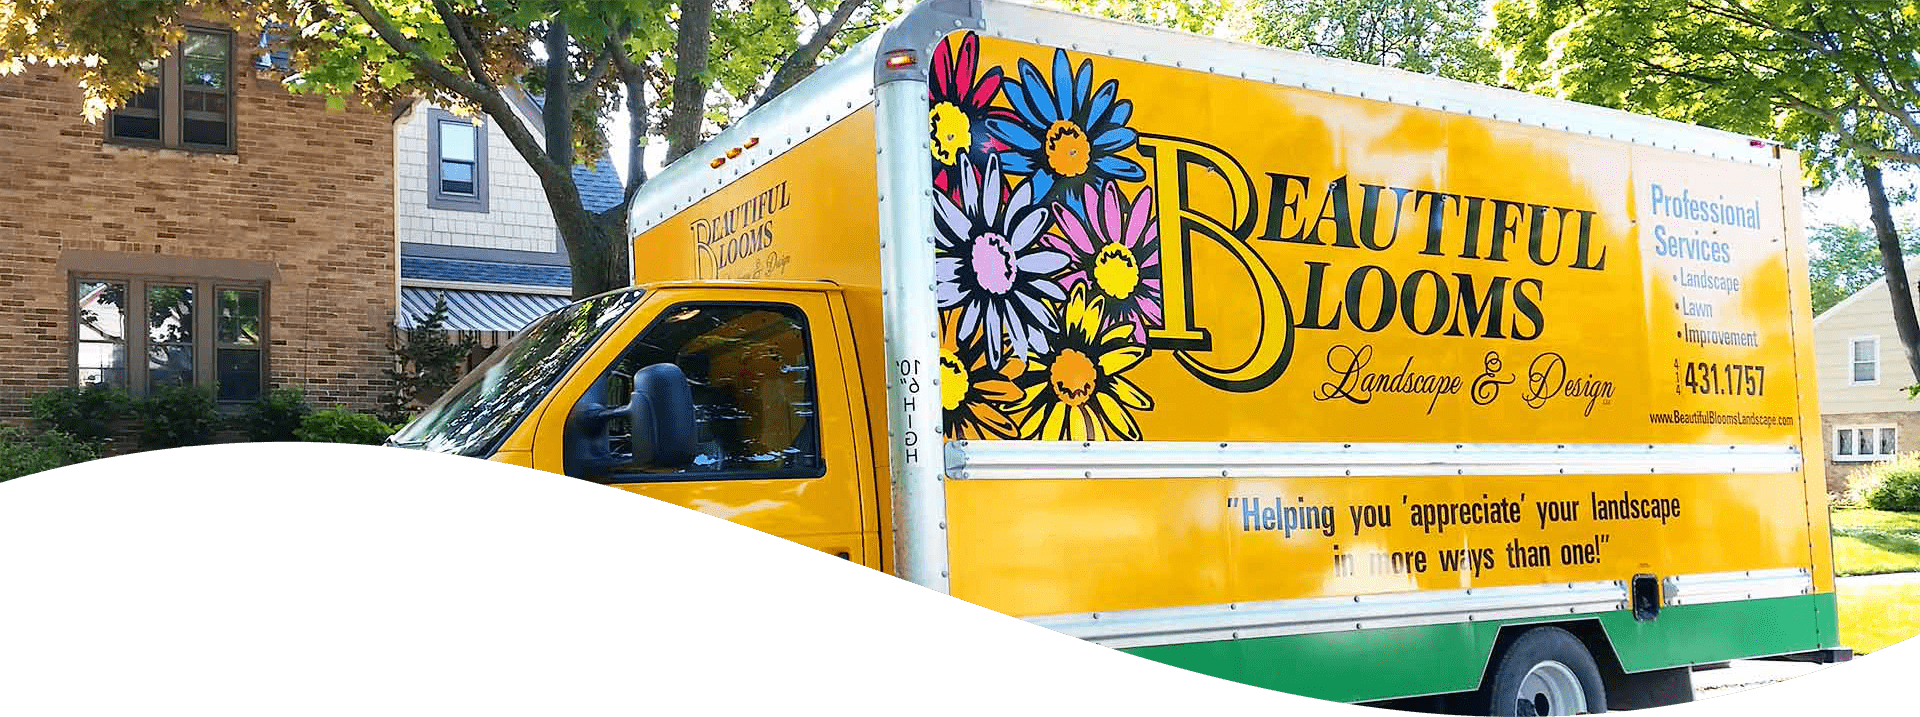 A colorful landscaping company truck is parked on a residential street, with vibrant flower graphics and advertising text on its side.